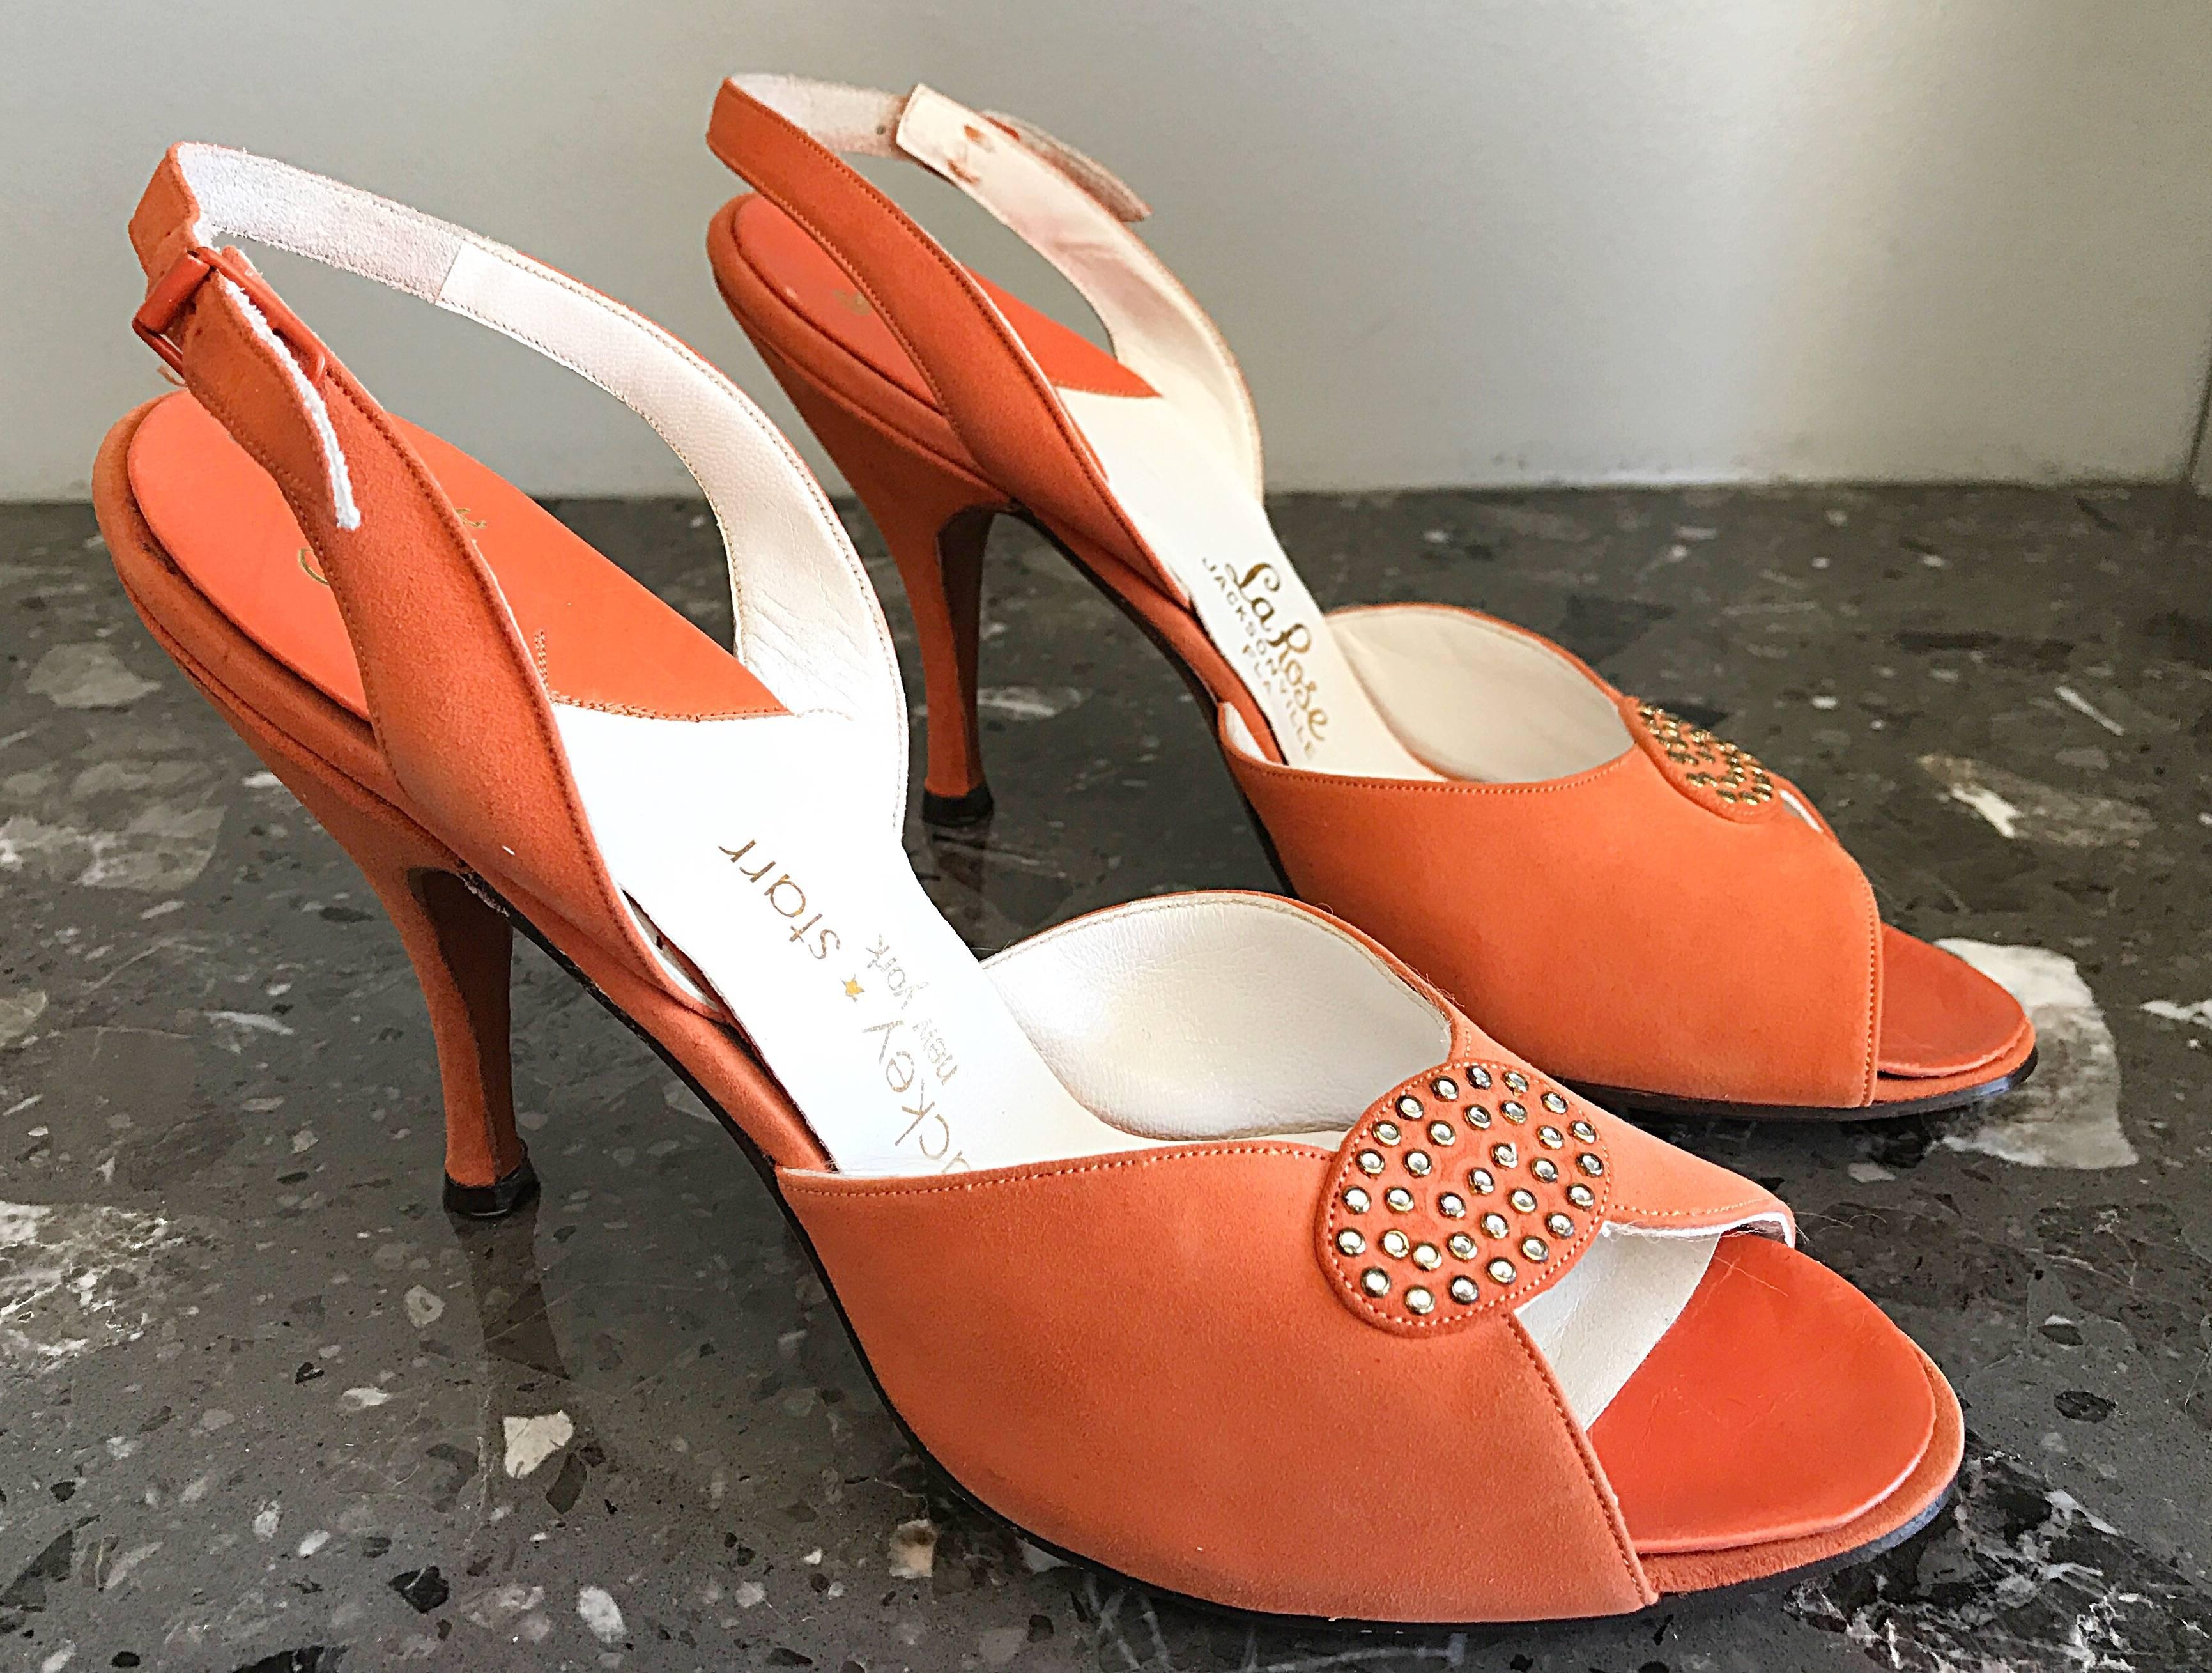 Brand new, never worn 50s vintage MACKEY STARR sorbet orange peep toe slingback high heel shoes! Features rhinestones at the toe. Adjustable sling back strap. Leather sole. Great with shorts, jeans, a skirt or a dress. 
In great unworn condition.